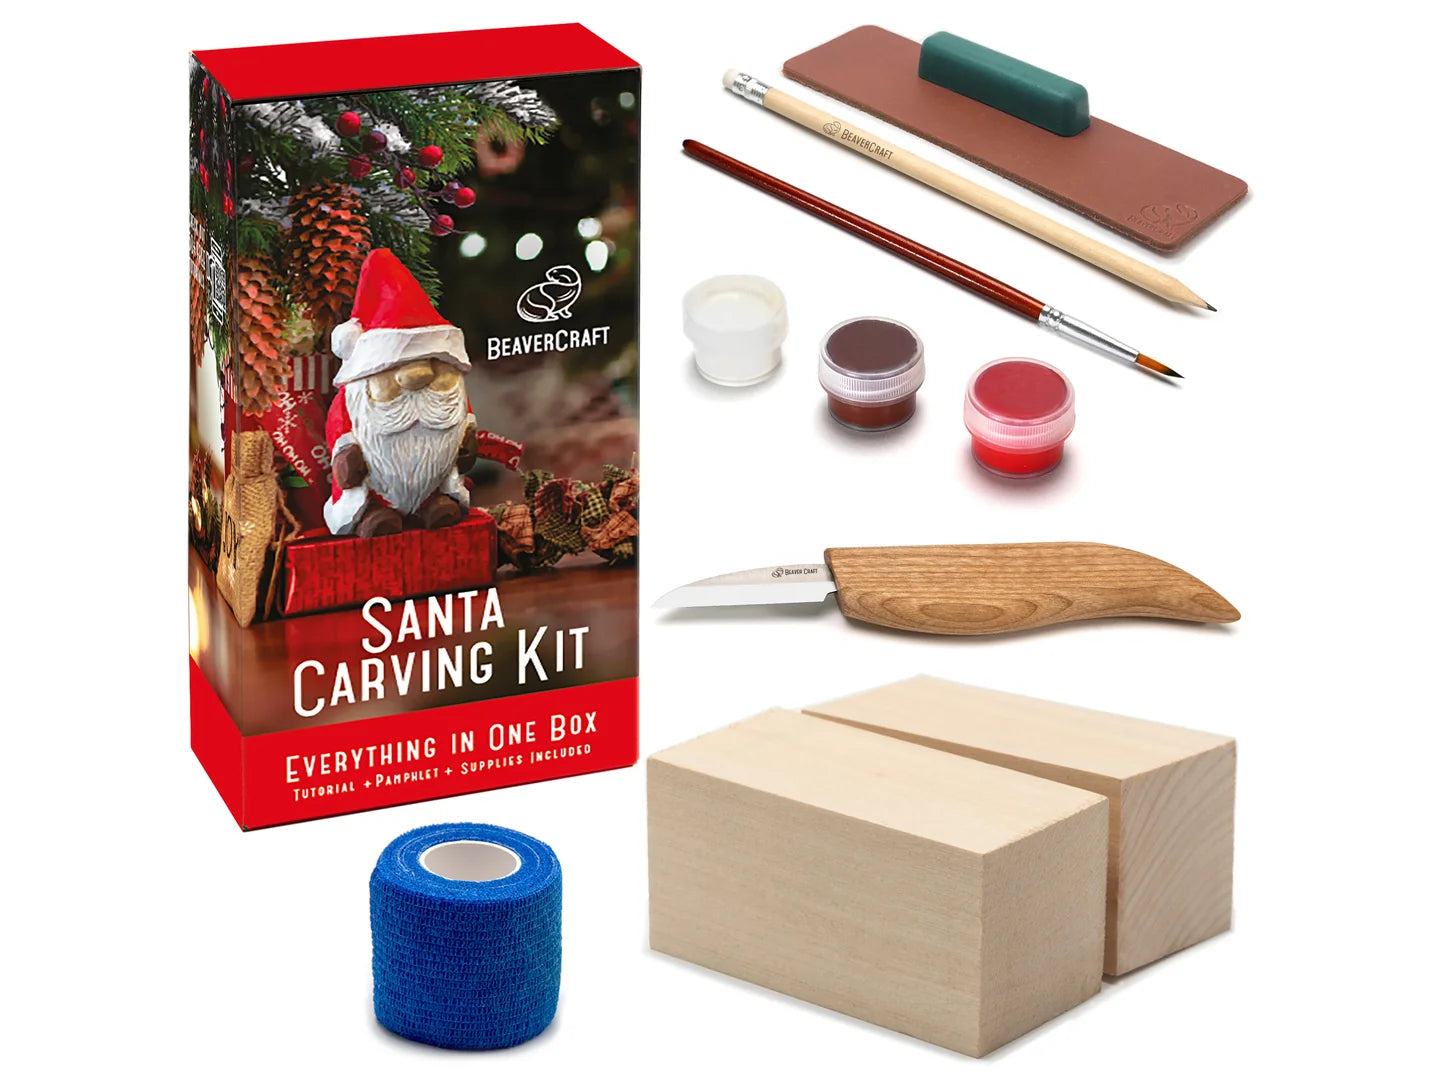 BeaverCraft Whittling Kit for Beginners, Wood Carving Kit for Beginners -  Wood Carving Tools Woodworking Kit for Adults and Teens - Whittling Knife  Kit with Wood Blocks - Wood Carving Set DIY03 Wizard